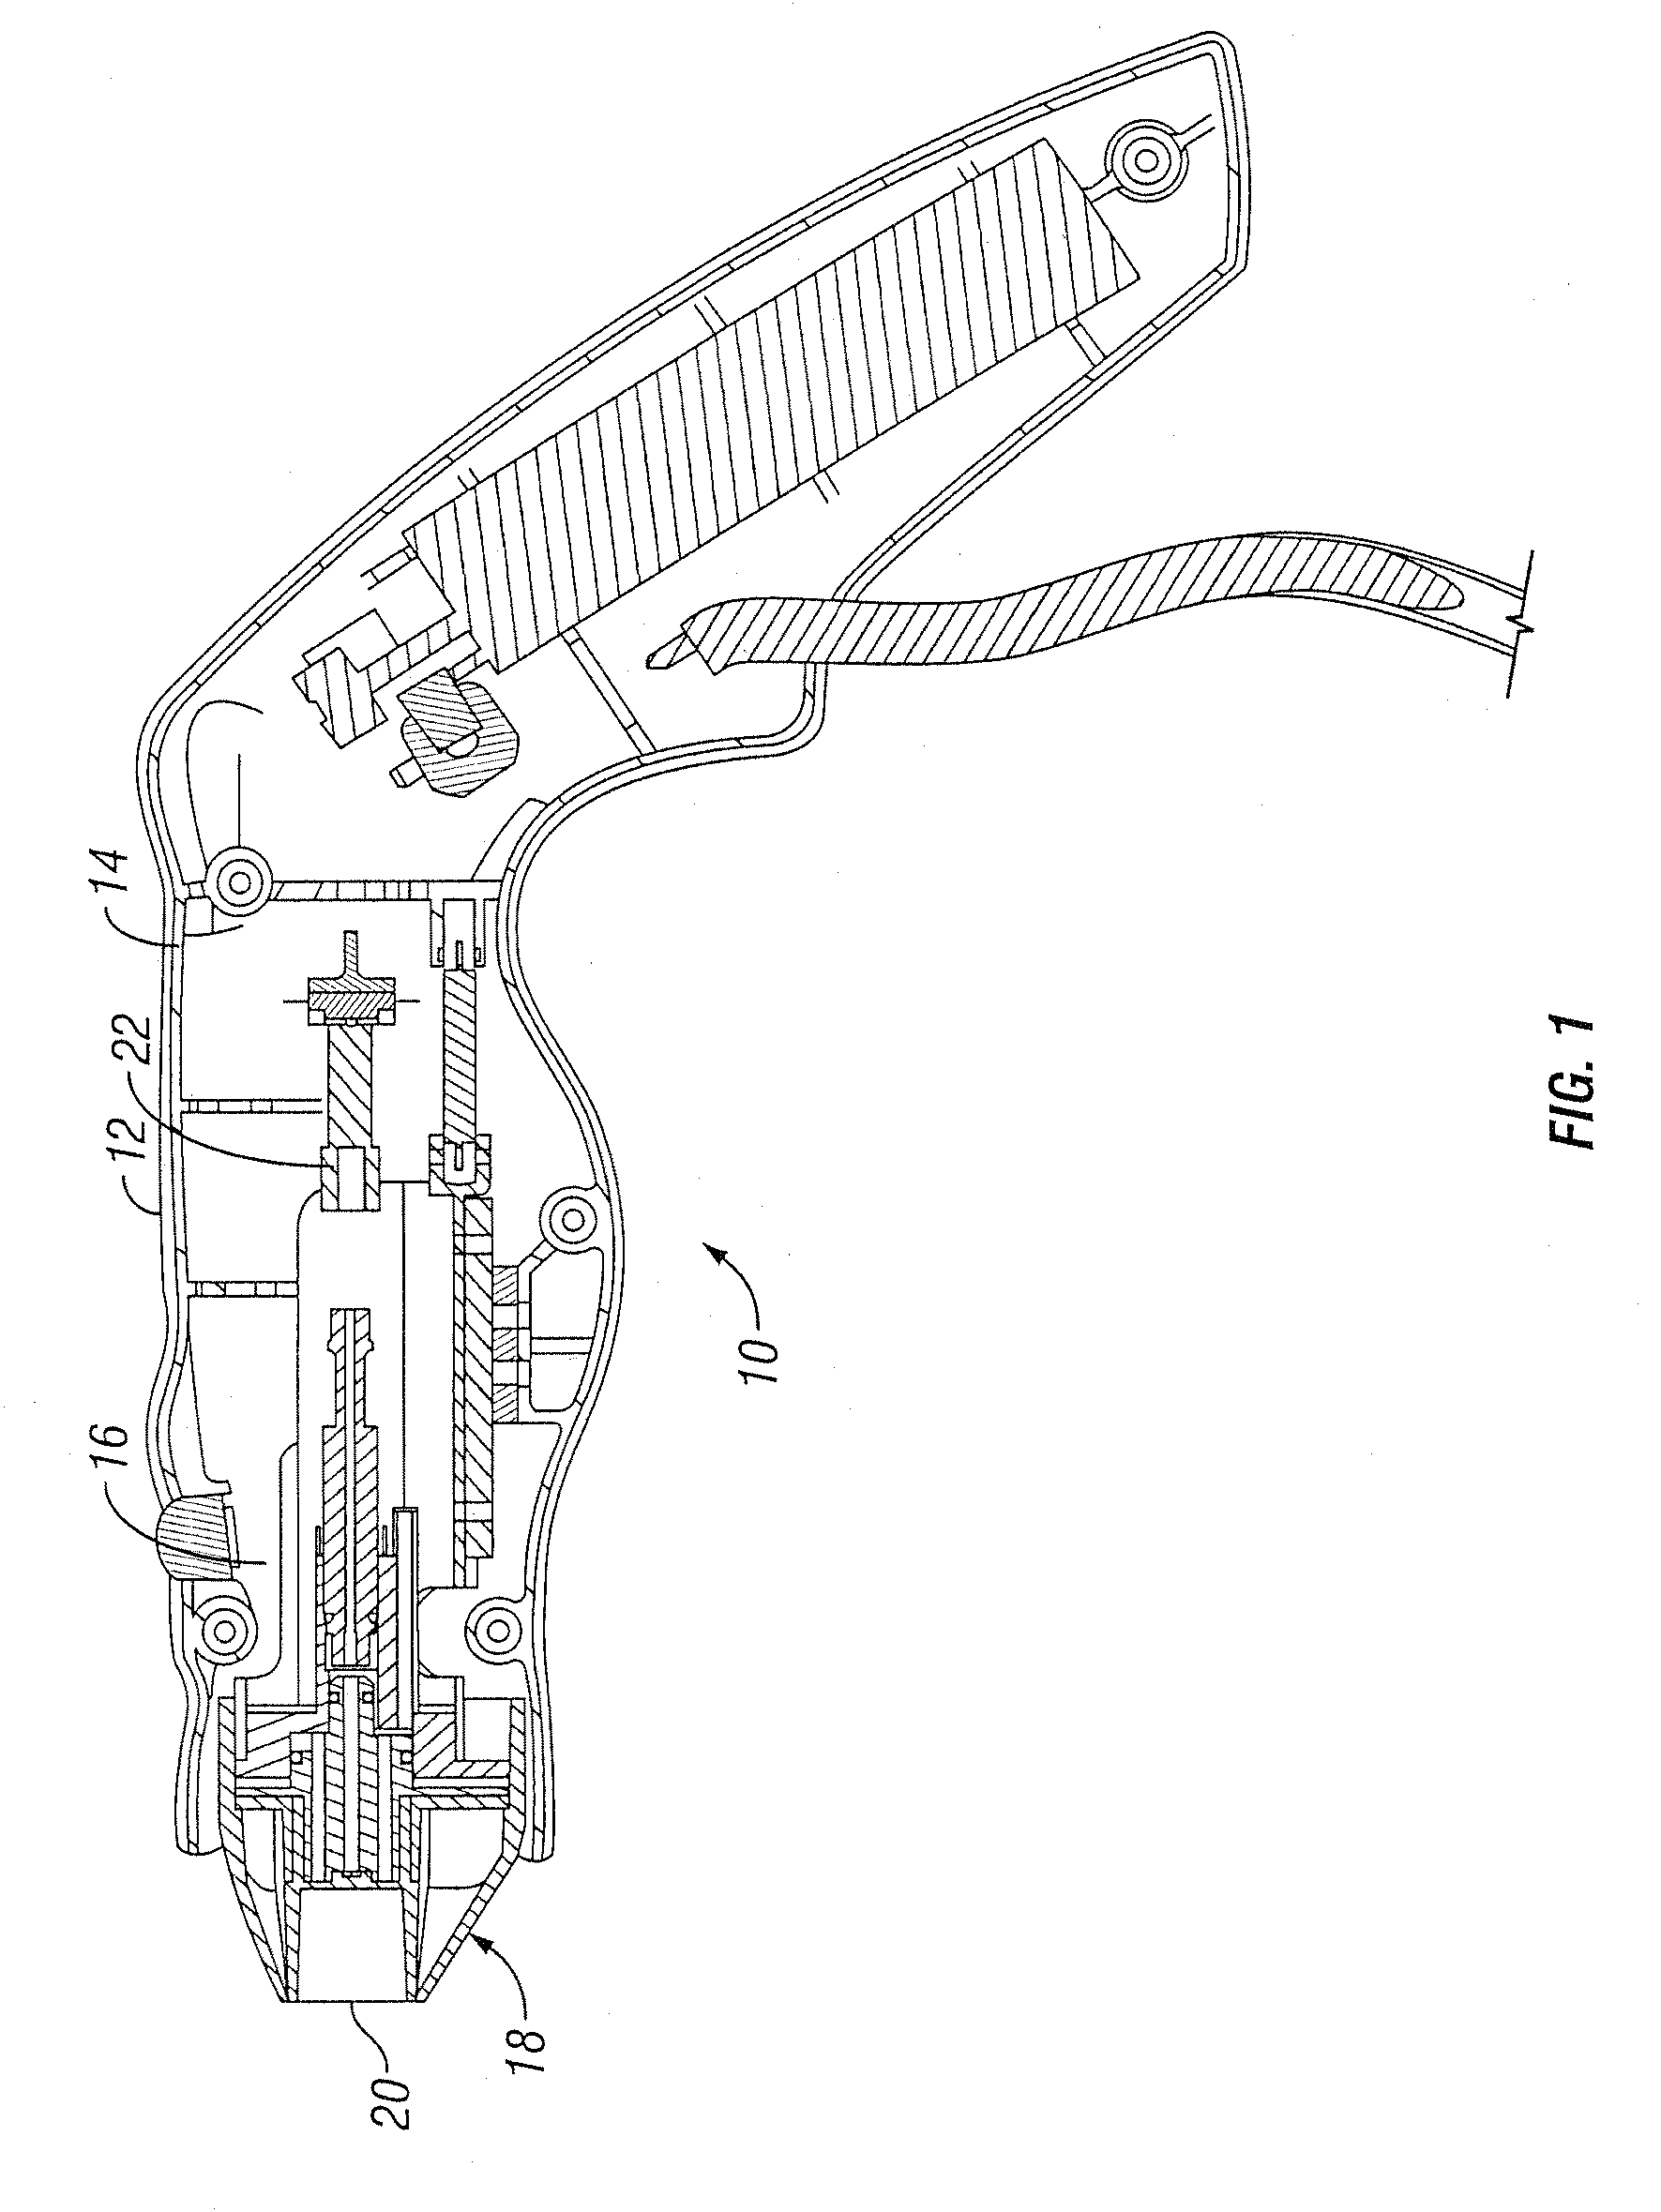 Energy delivery device for treating tissue